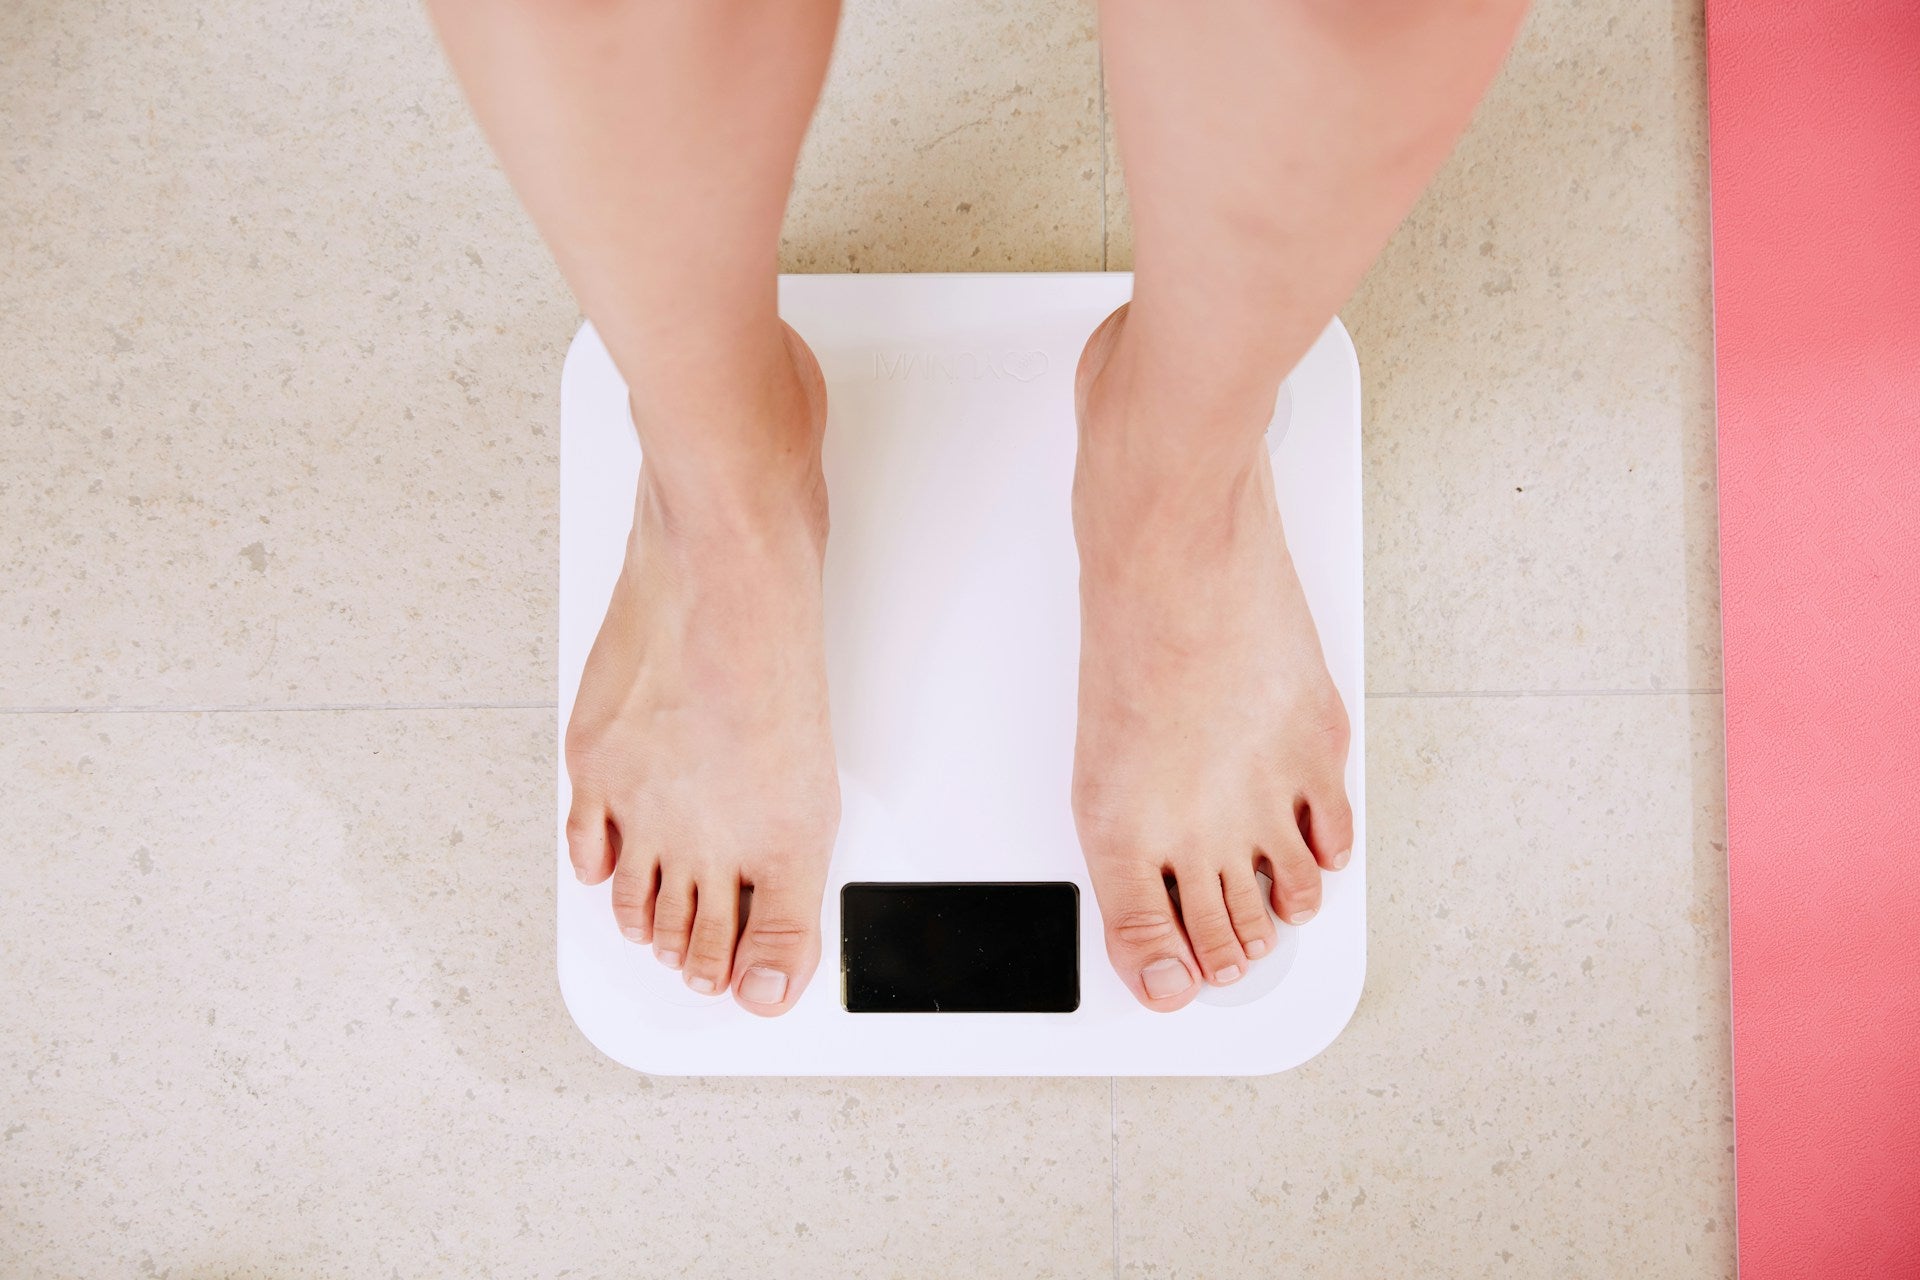 Can Massage Help With Weight Loss? Facts, Tips, & Common Myths